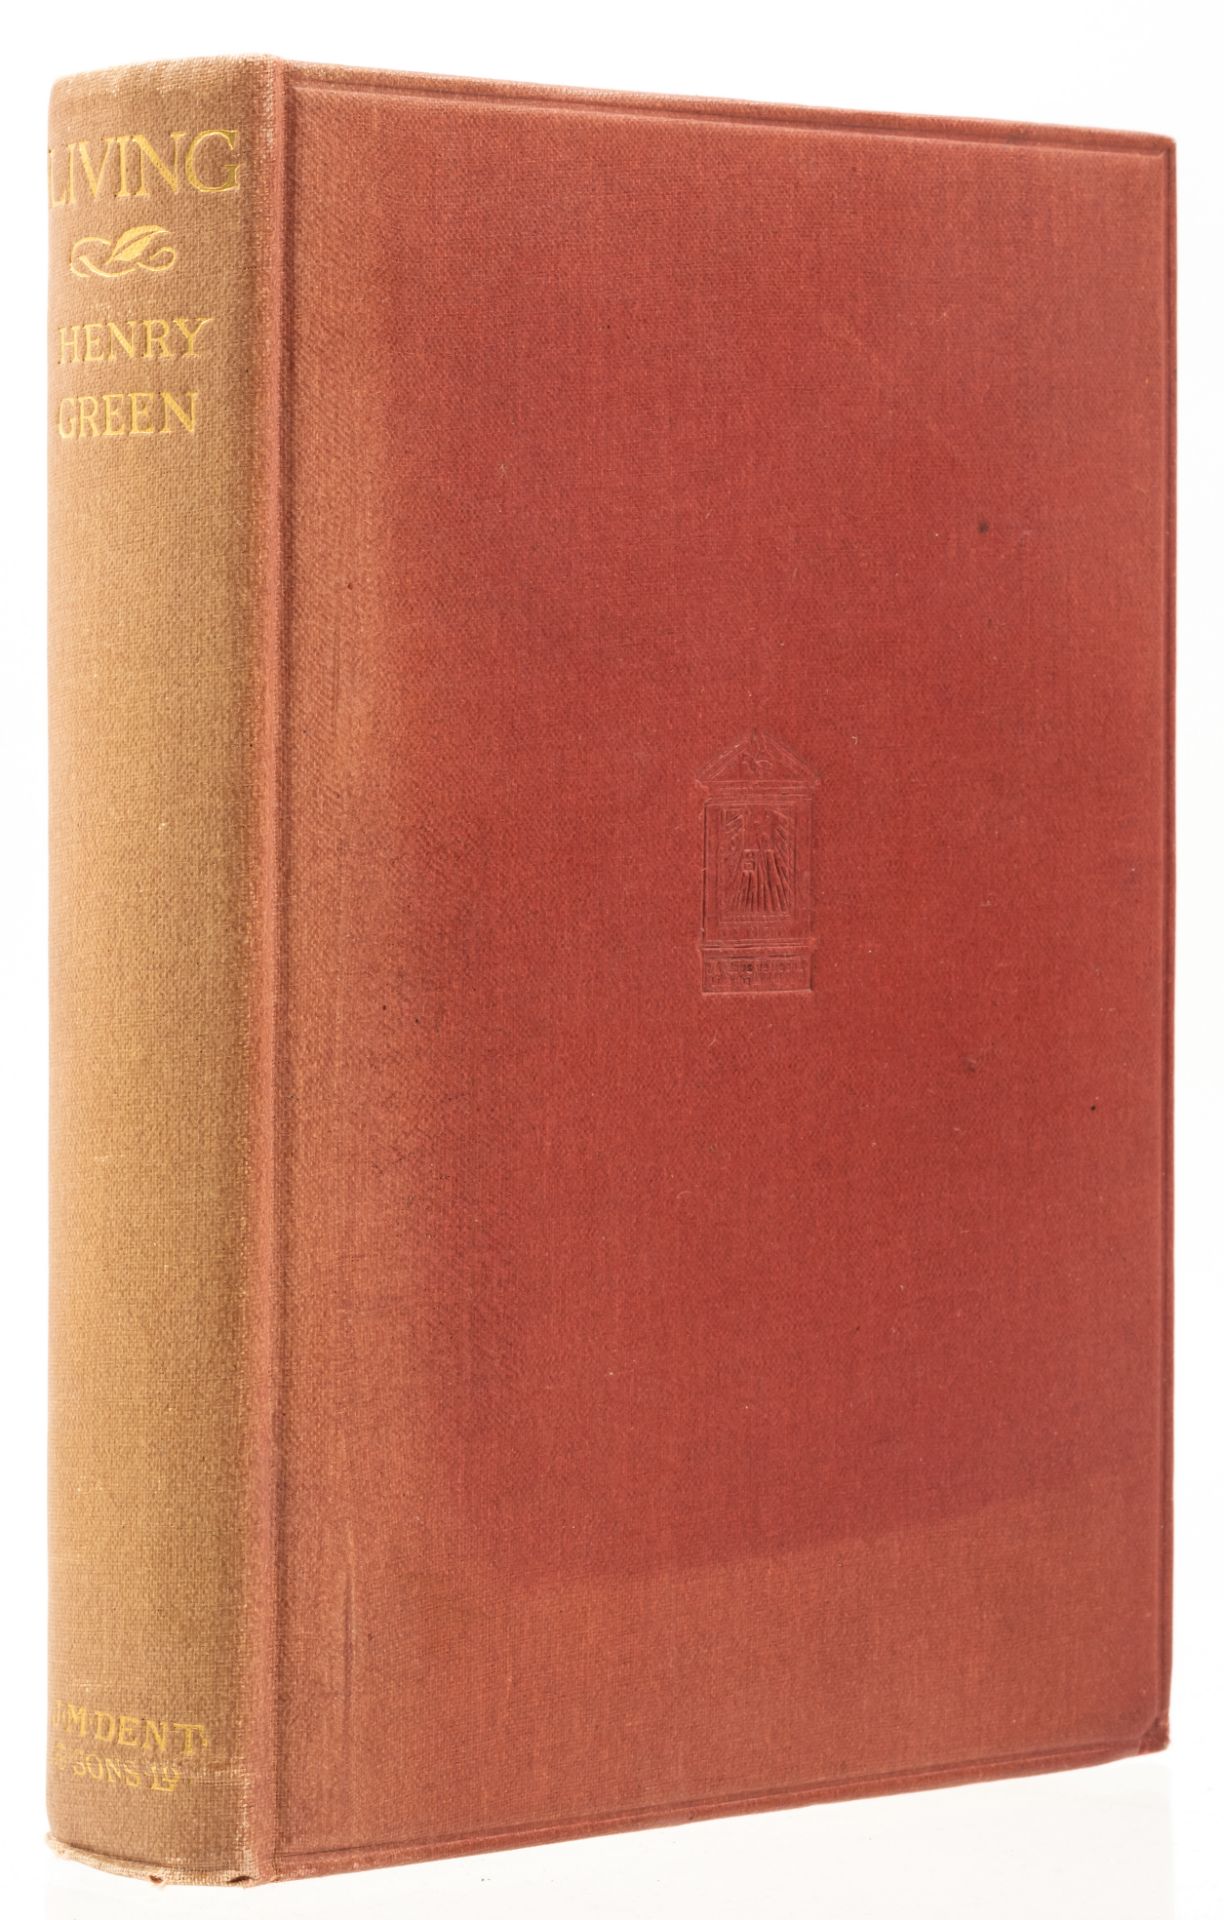 Green (Henry) Living, first edition, 1929.